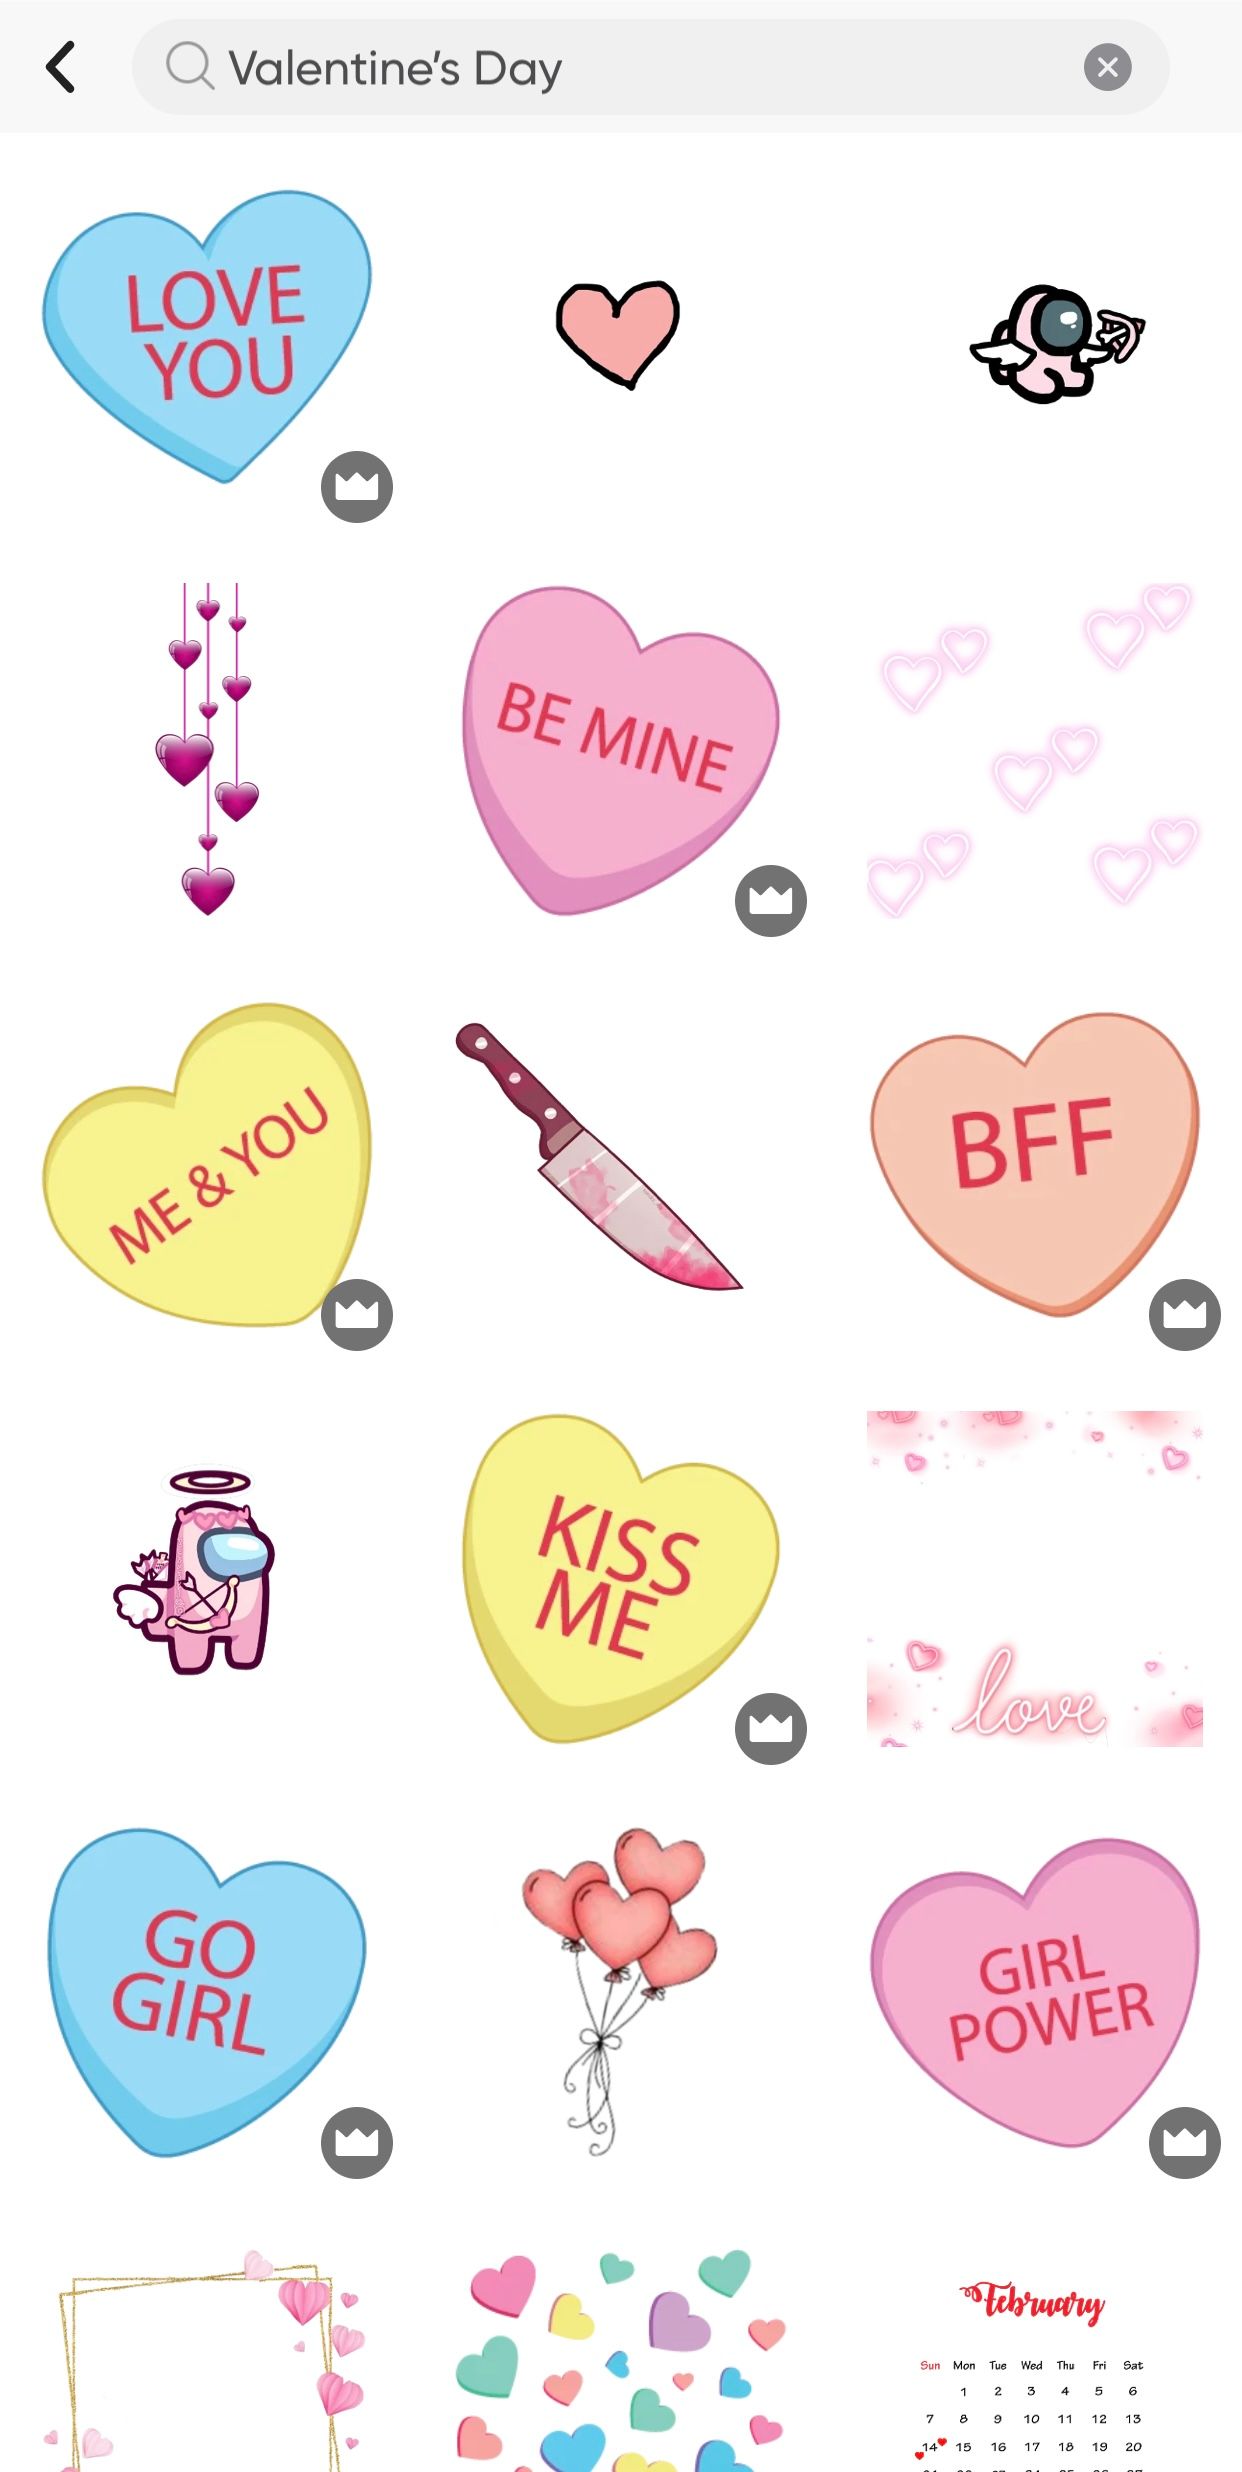 Variety of Valentine's Day stickers in Picsart